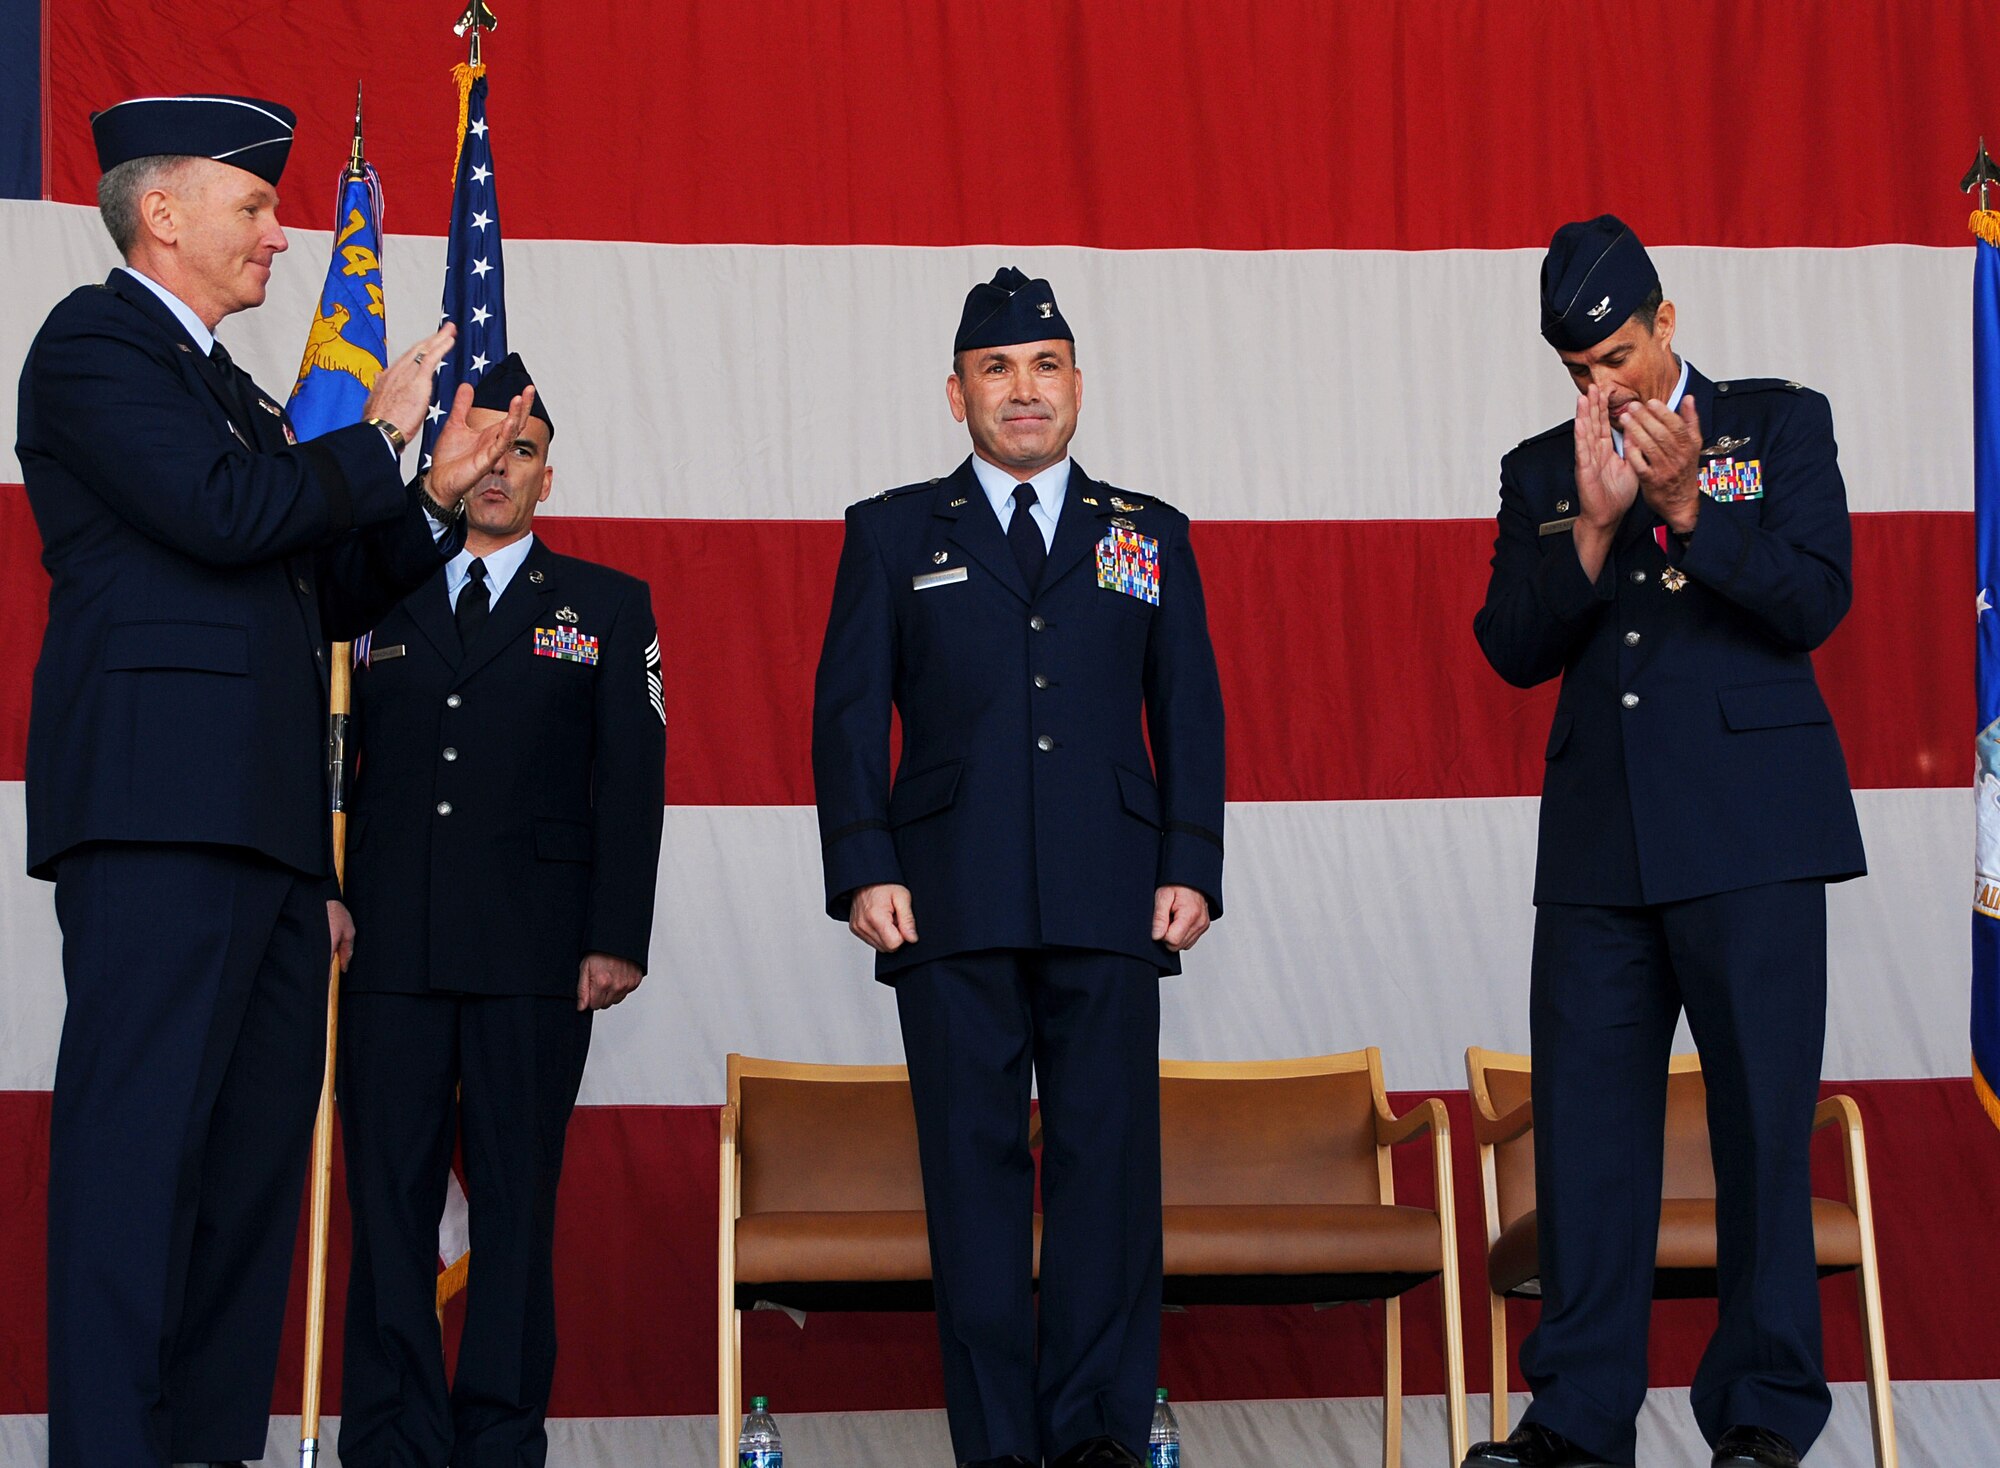 Maj. Gen. William Binger, left, and Col. Jose Monteagudo, right, congratulate Col. Kurt Gallegos, newly assigned 944th Fighter Wing commander, after a change-of-command ceremony Sunday at Luke Air Force Base, Feb. 10. (U.S. Air Force photo/Tech. Sgt. Louis Vega)